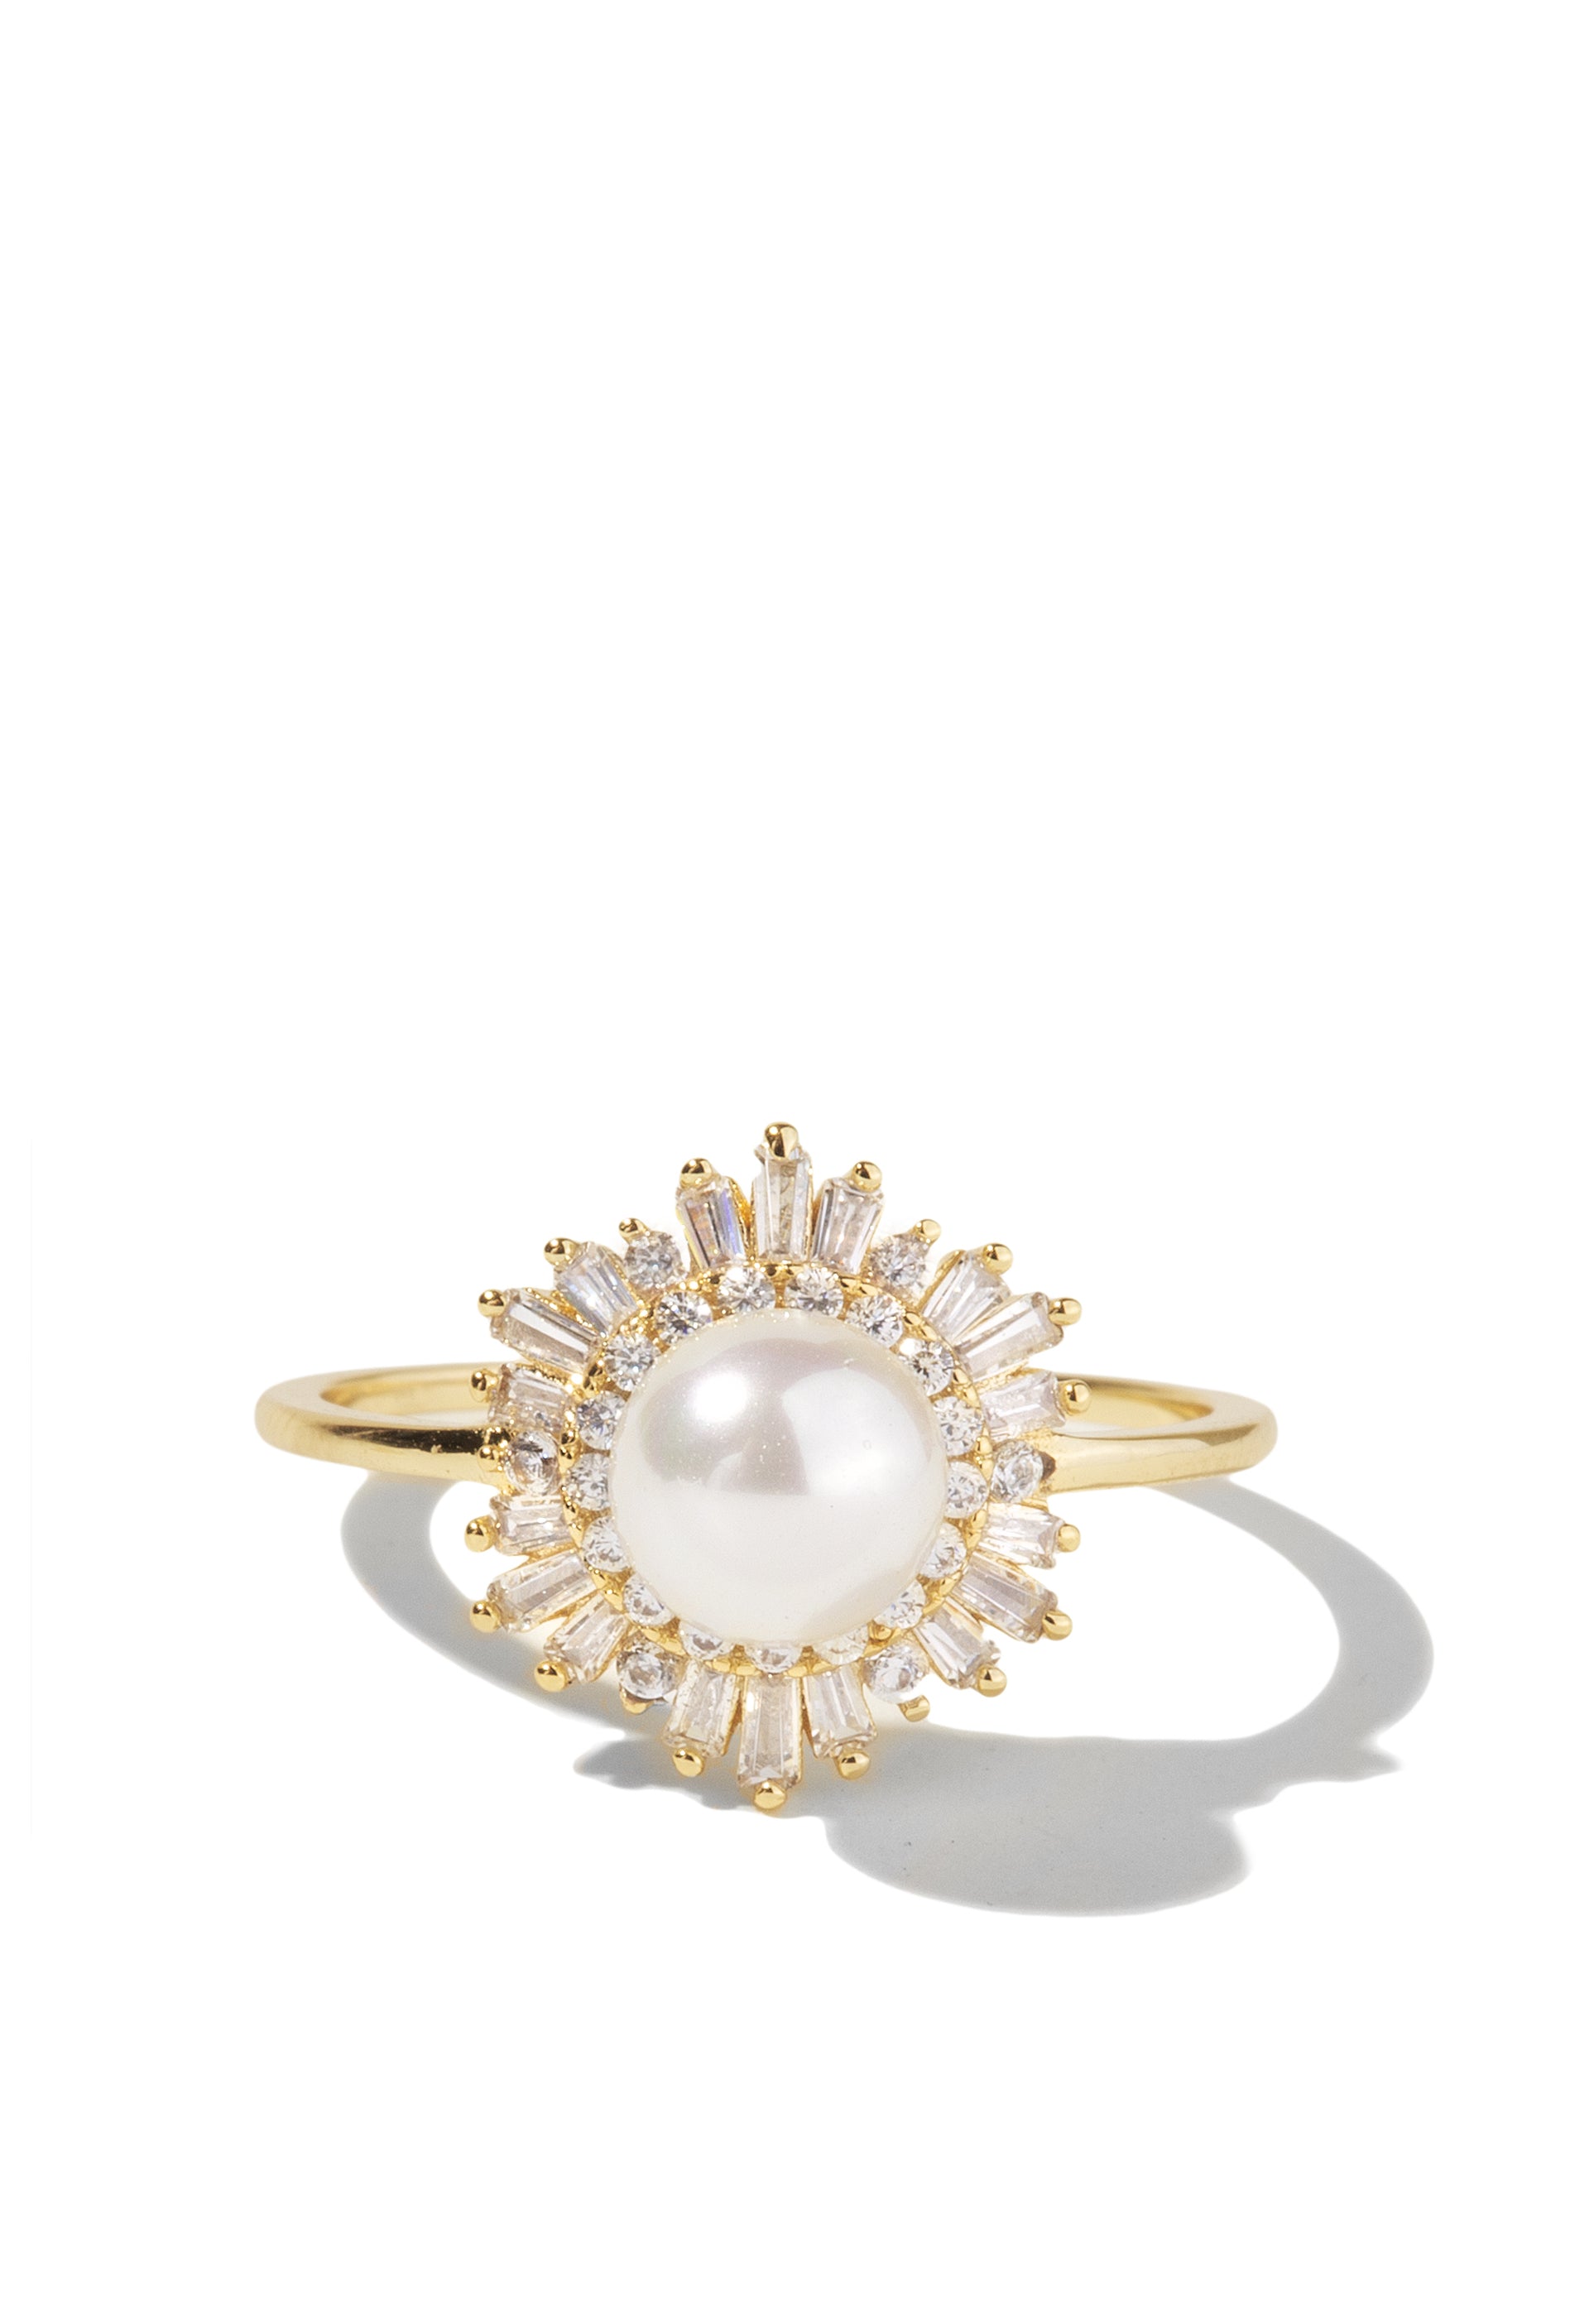 Cring Coco Sale Hawaiian Ring with Pearls Women's Gold Plated